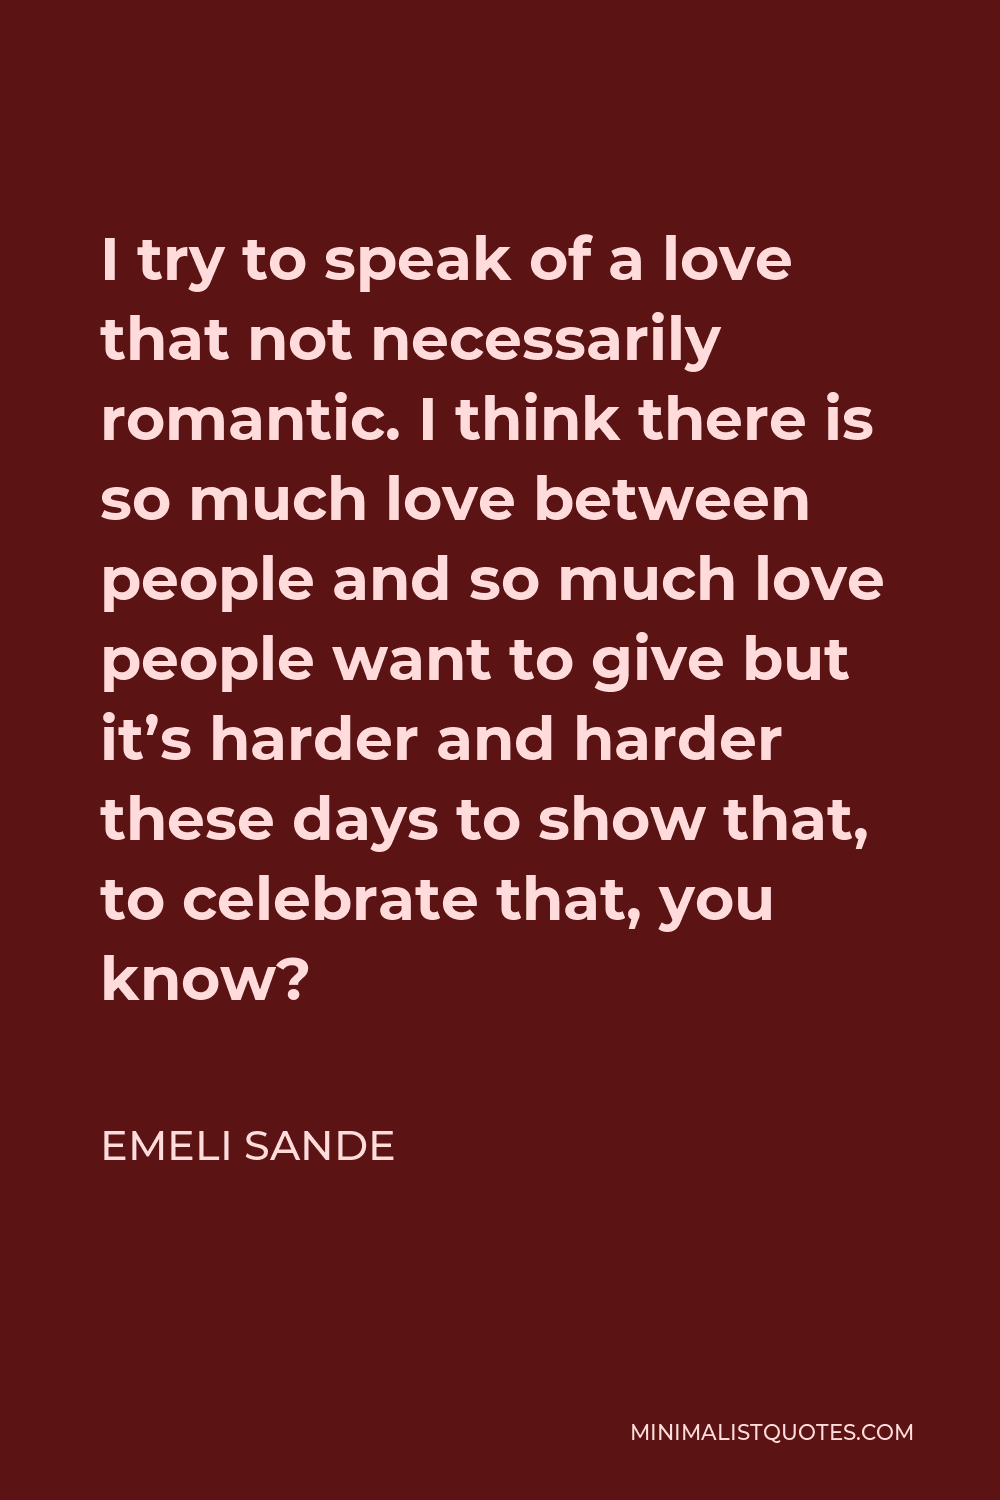 Emeli Sande Quote - I try to speak of a love that not necessarily romantic. I think there is so much love between people and so much love people want to give but it’s harder and harder these days to show that, to celebrate that, you know?